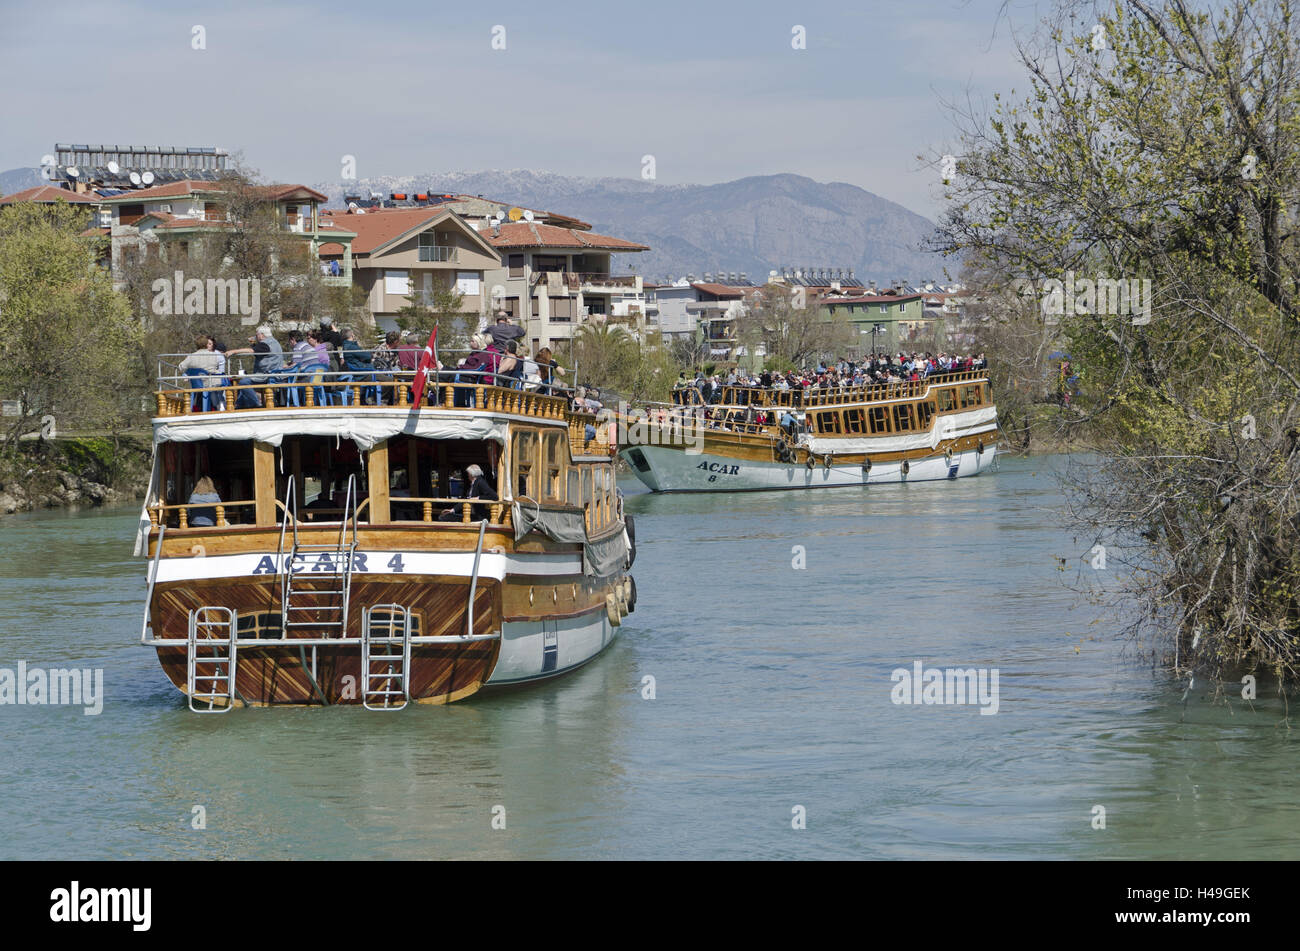 Turkey, south coast, province of Antalya, Manavgat, flux, excursion steamer, tourist, Manavgat flux, steamboat, holiday ships, ships, people, river scenery, tourism, ship excursion, excursion, Stock Photo